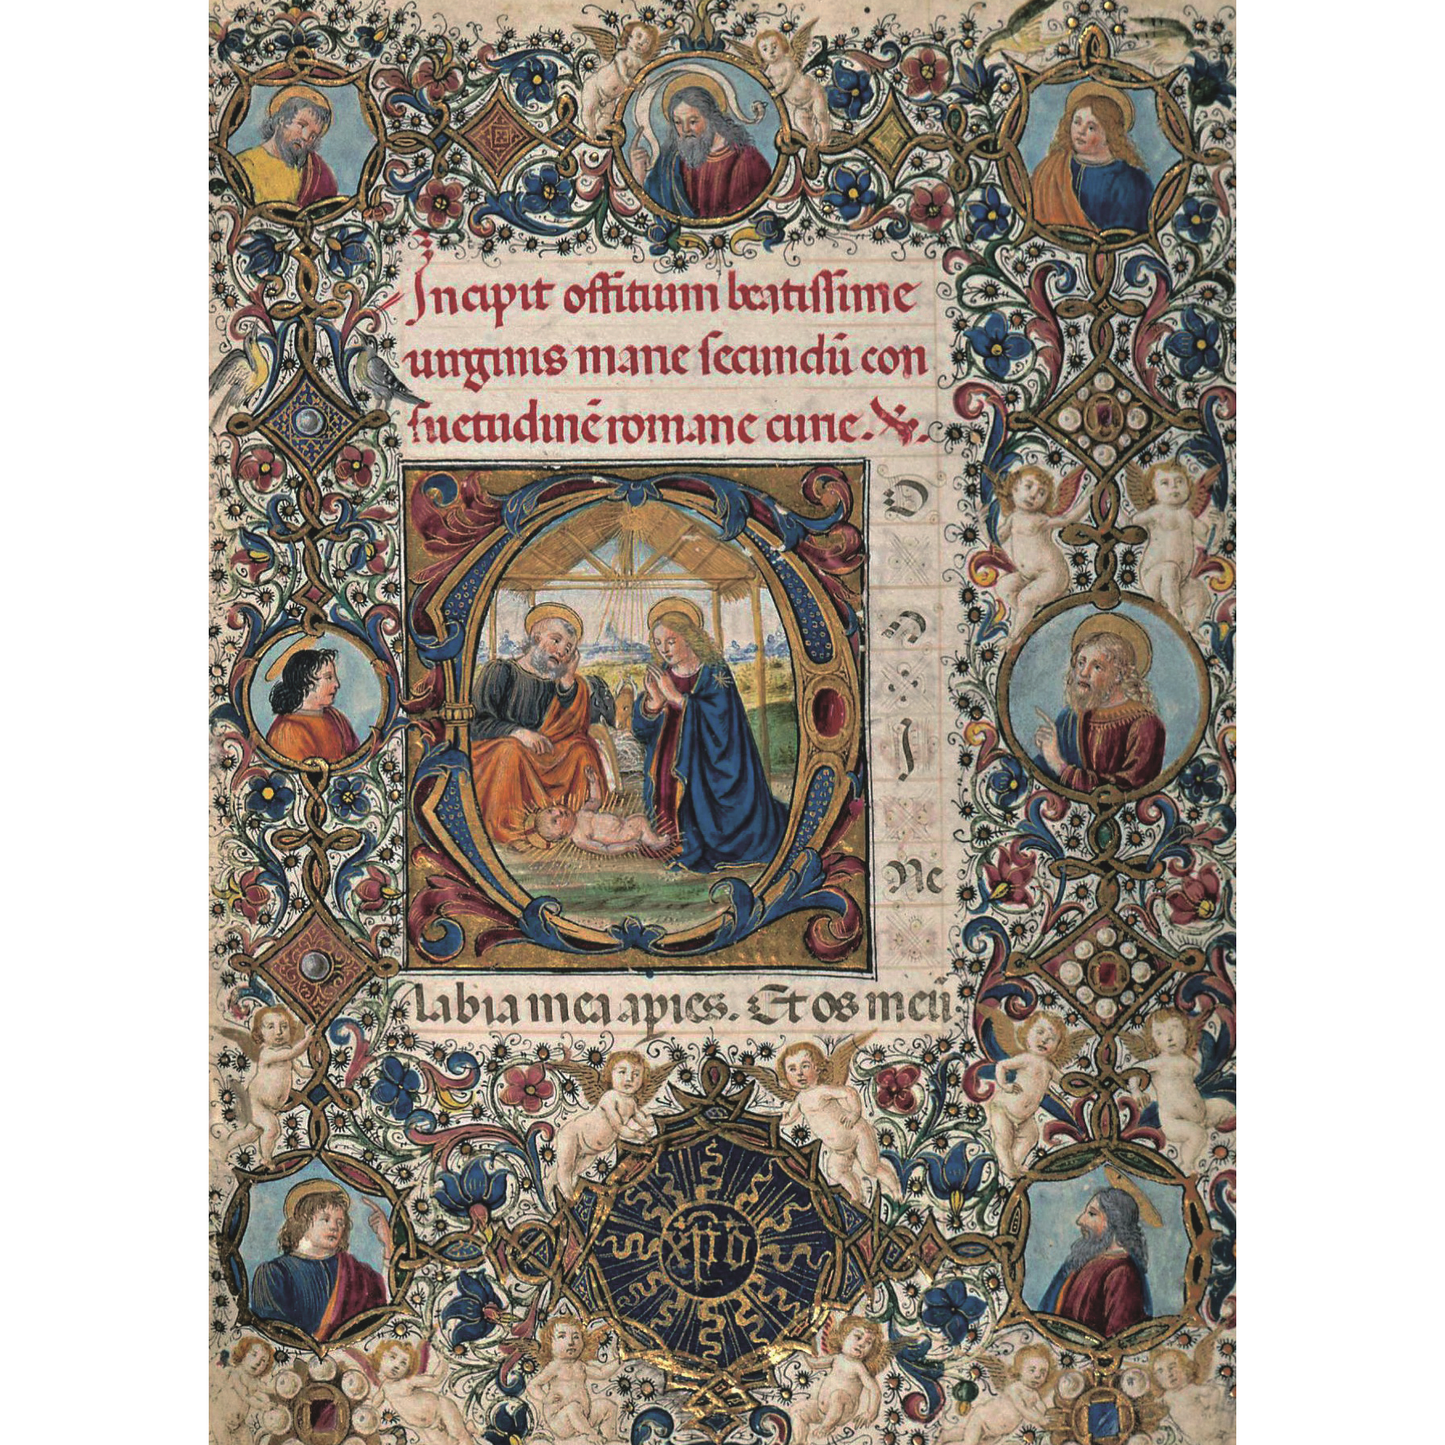 Rectangular Christmas card, portrait format. Illuminated manuscript page with central illuminated letter showing nativity scene. From the collection of The Fitzwilliam Museum.